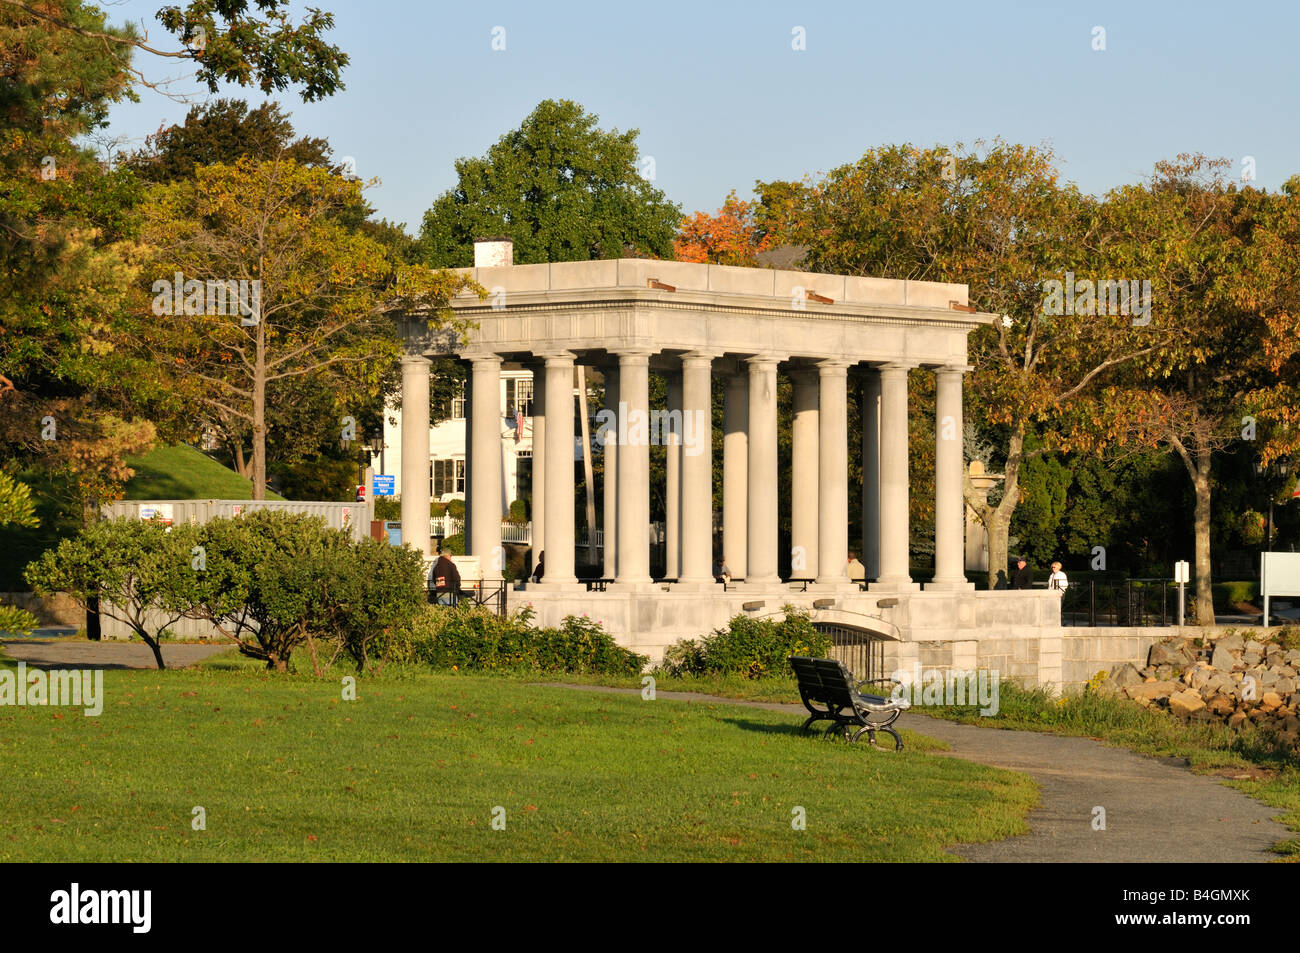 Plymouth Rock Memorial in Pilgrim Memorial State Park on Plymouth Harbor, MA USA Stock Photo